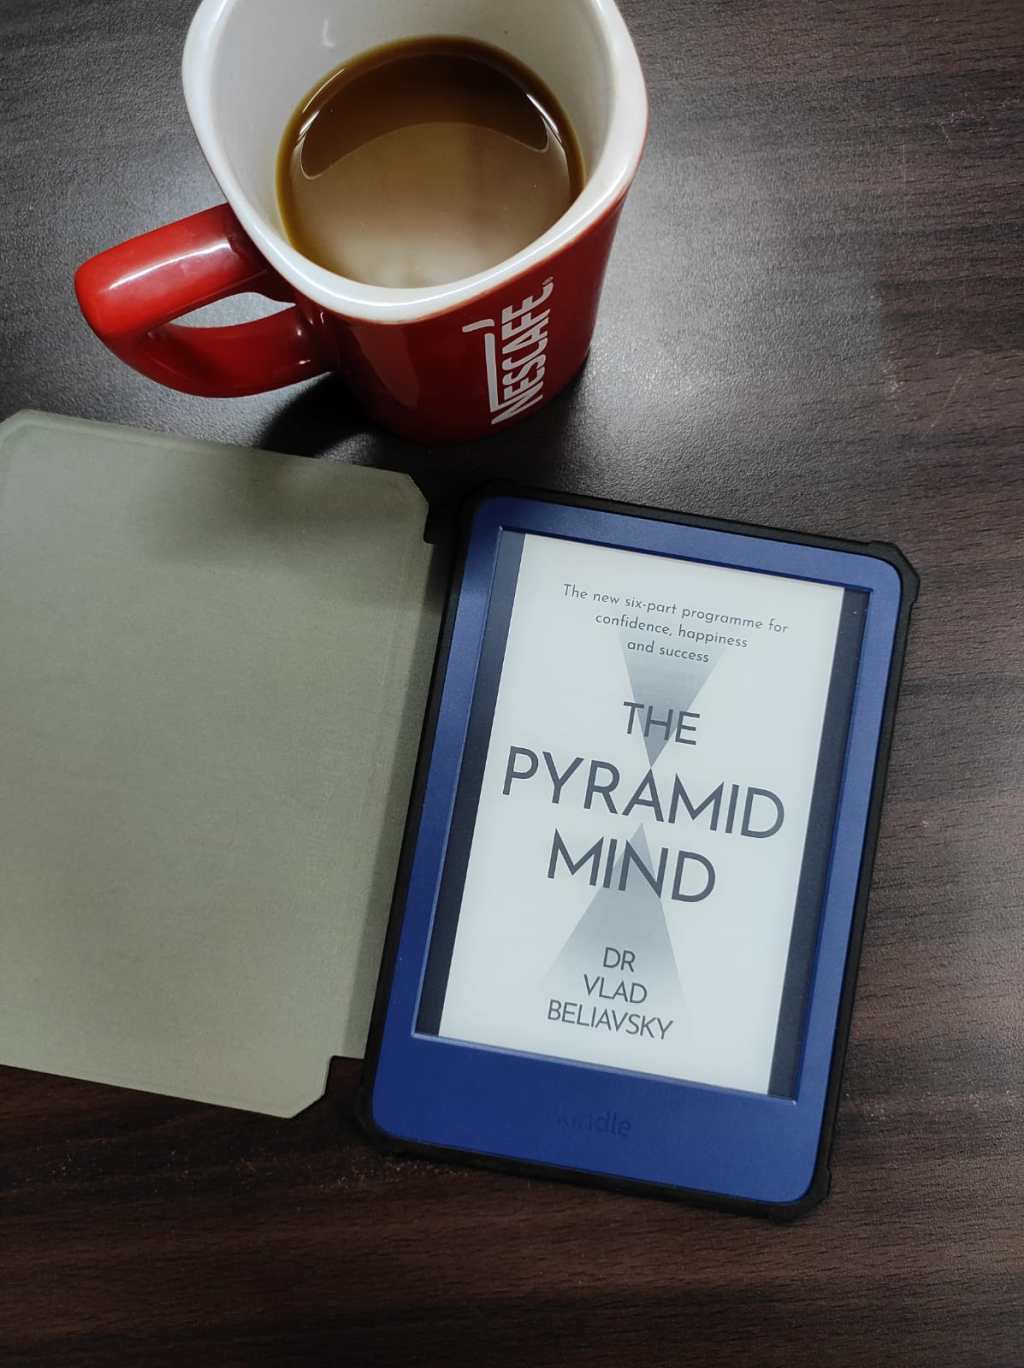 The Pyramid Mind by Dr. Vlad Beliavsky is an utterly brilliant book that teaches us how neuroscience can help us to navigate self-reflection and well-being – Book Review